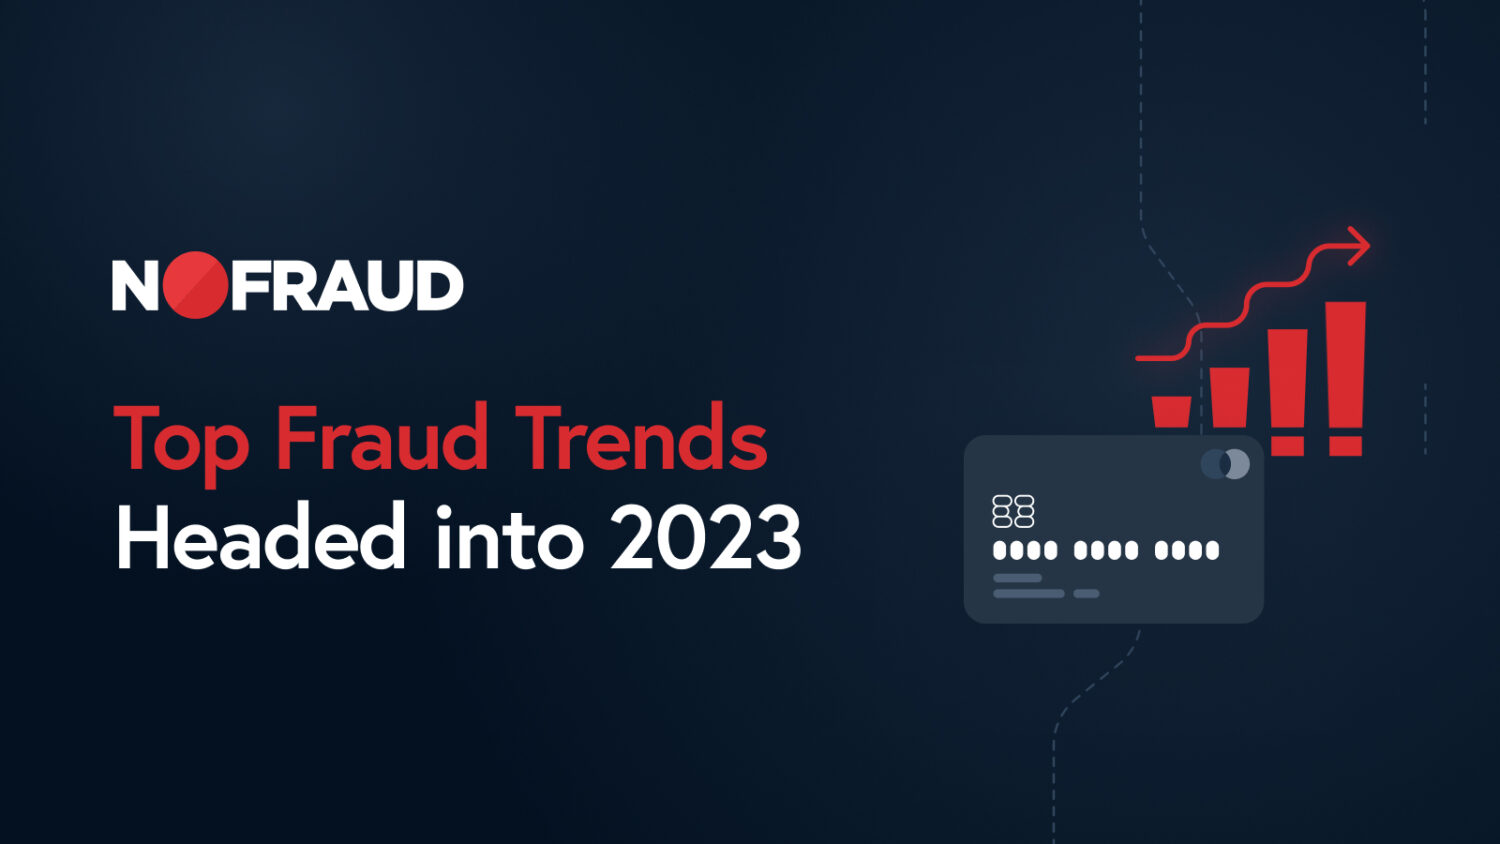 Top Fraud Trends Headed into 2023